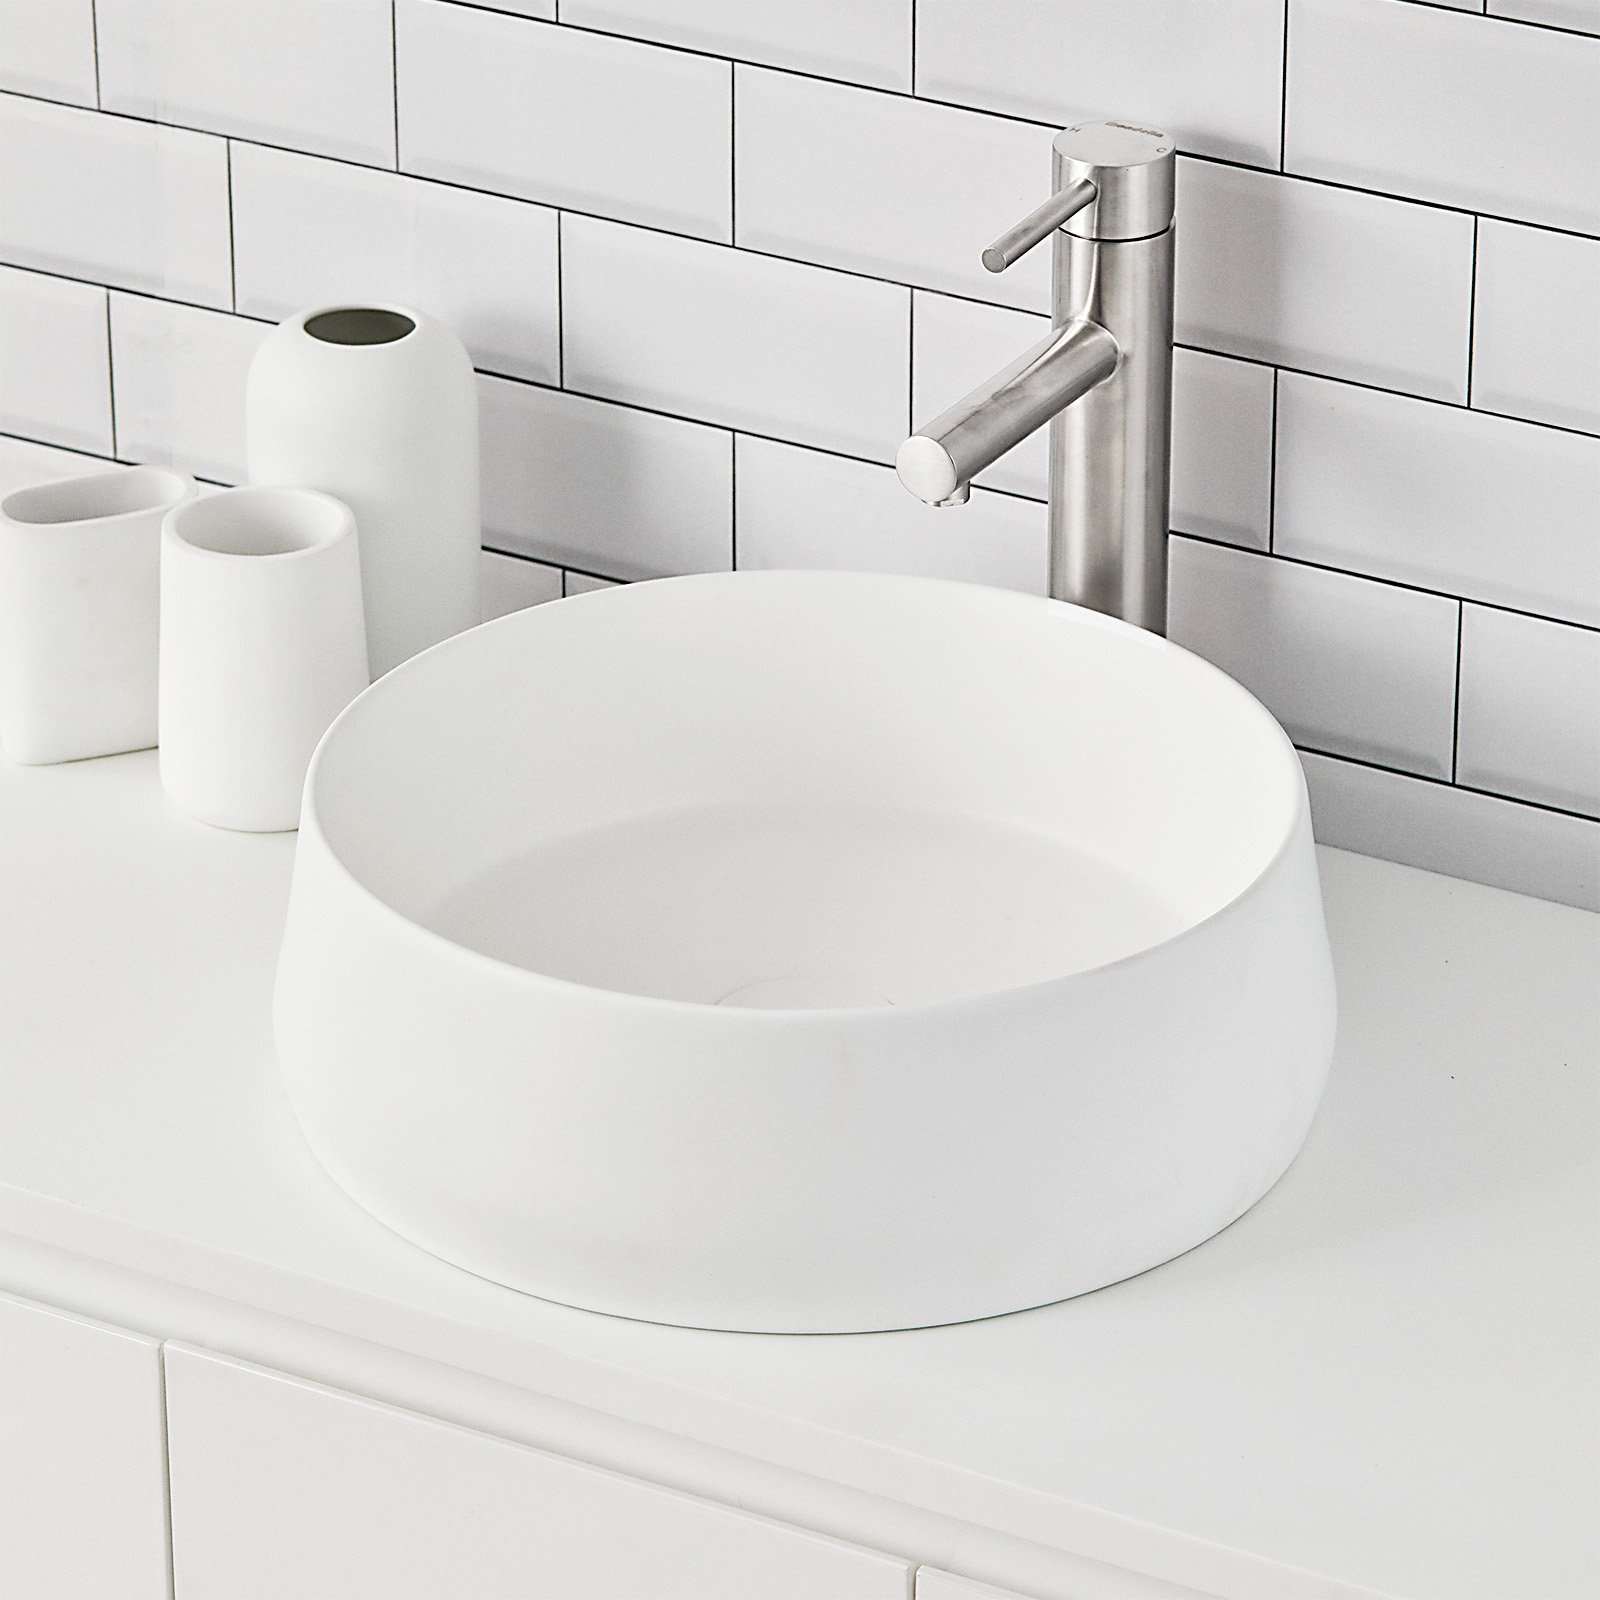 Inspired by the notion of &lsquo;quiet luxury&rsquo; the gentle form of the new Pod Basin imbues bathroom countertops with understated elegance and sophistication. Functionality is assured by its generous proportions ✨

Available now from @bunnings i